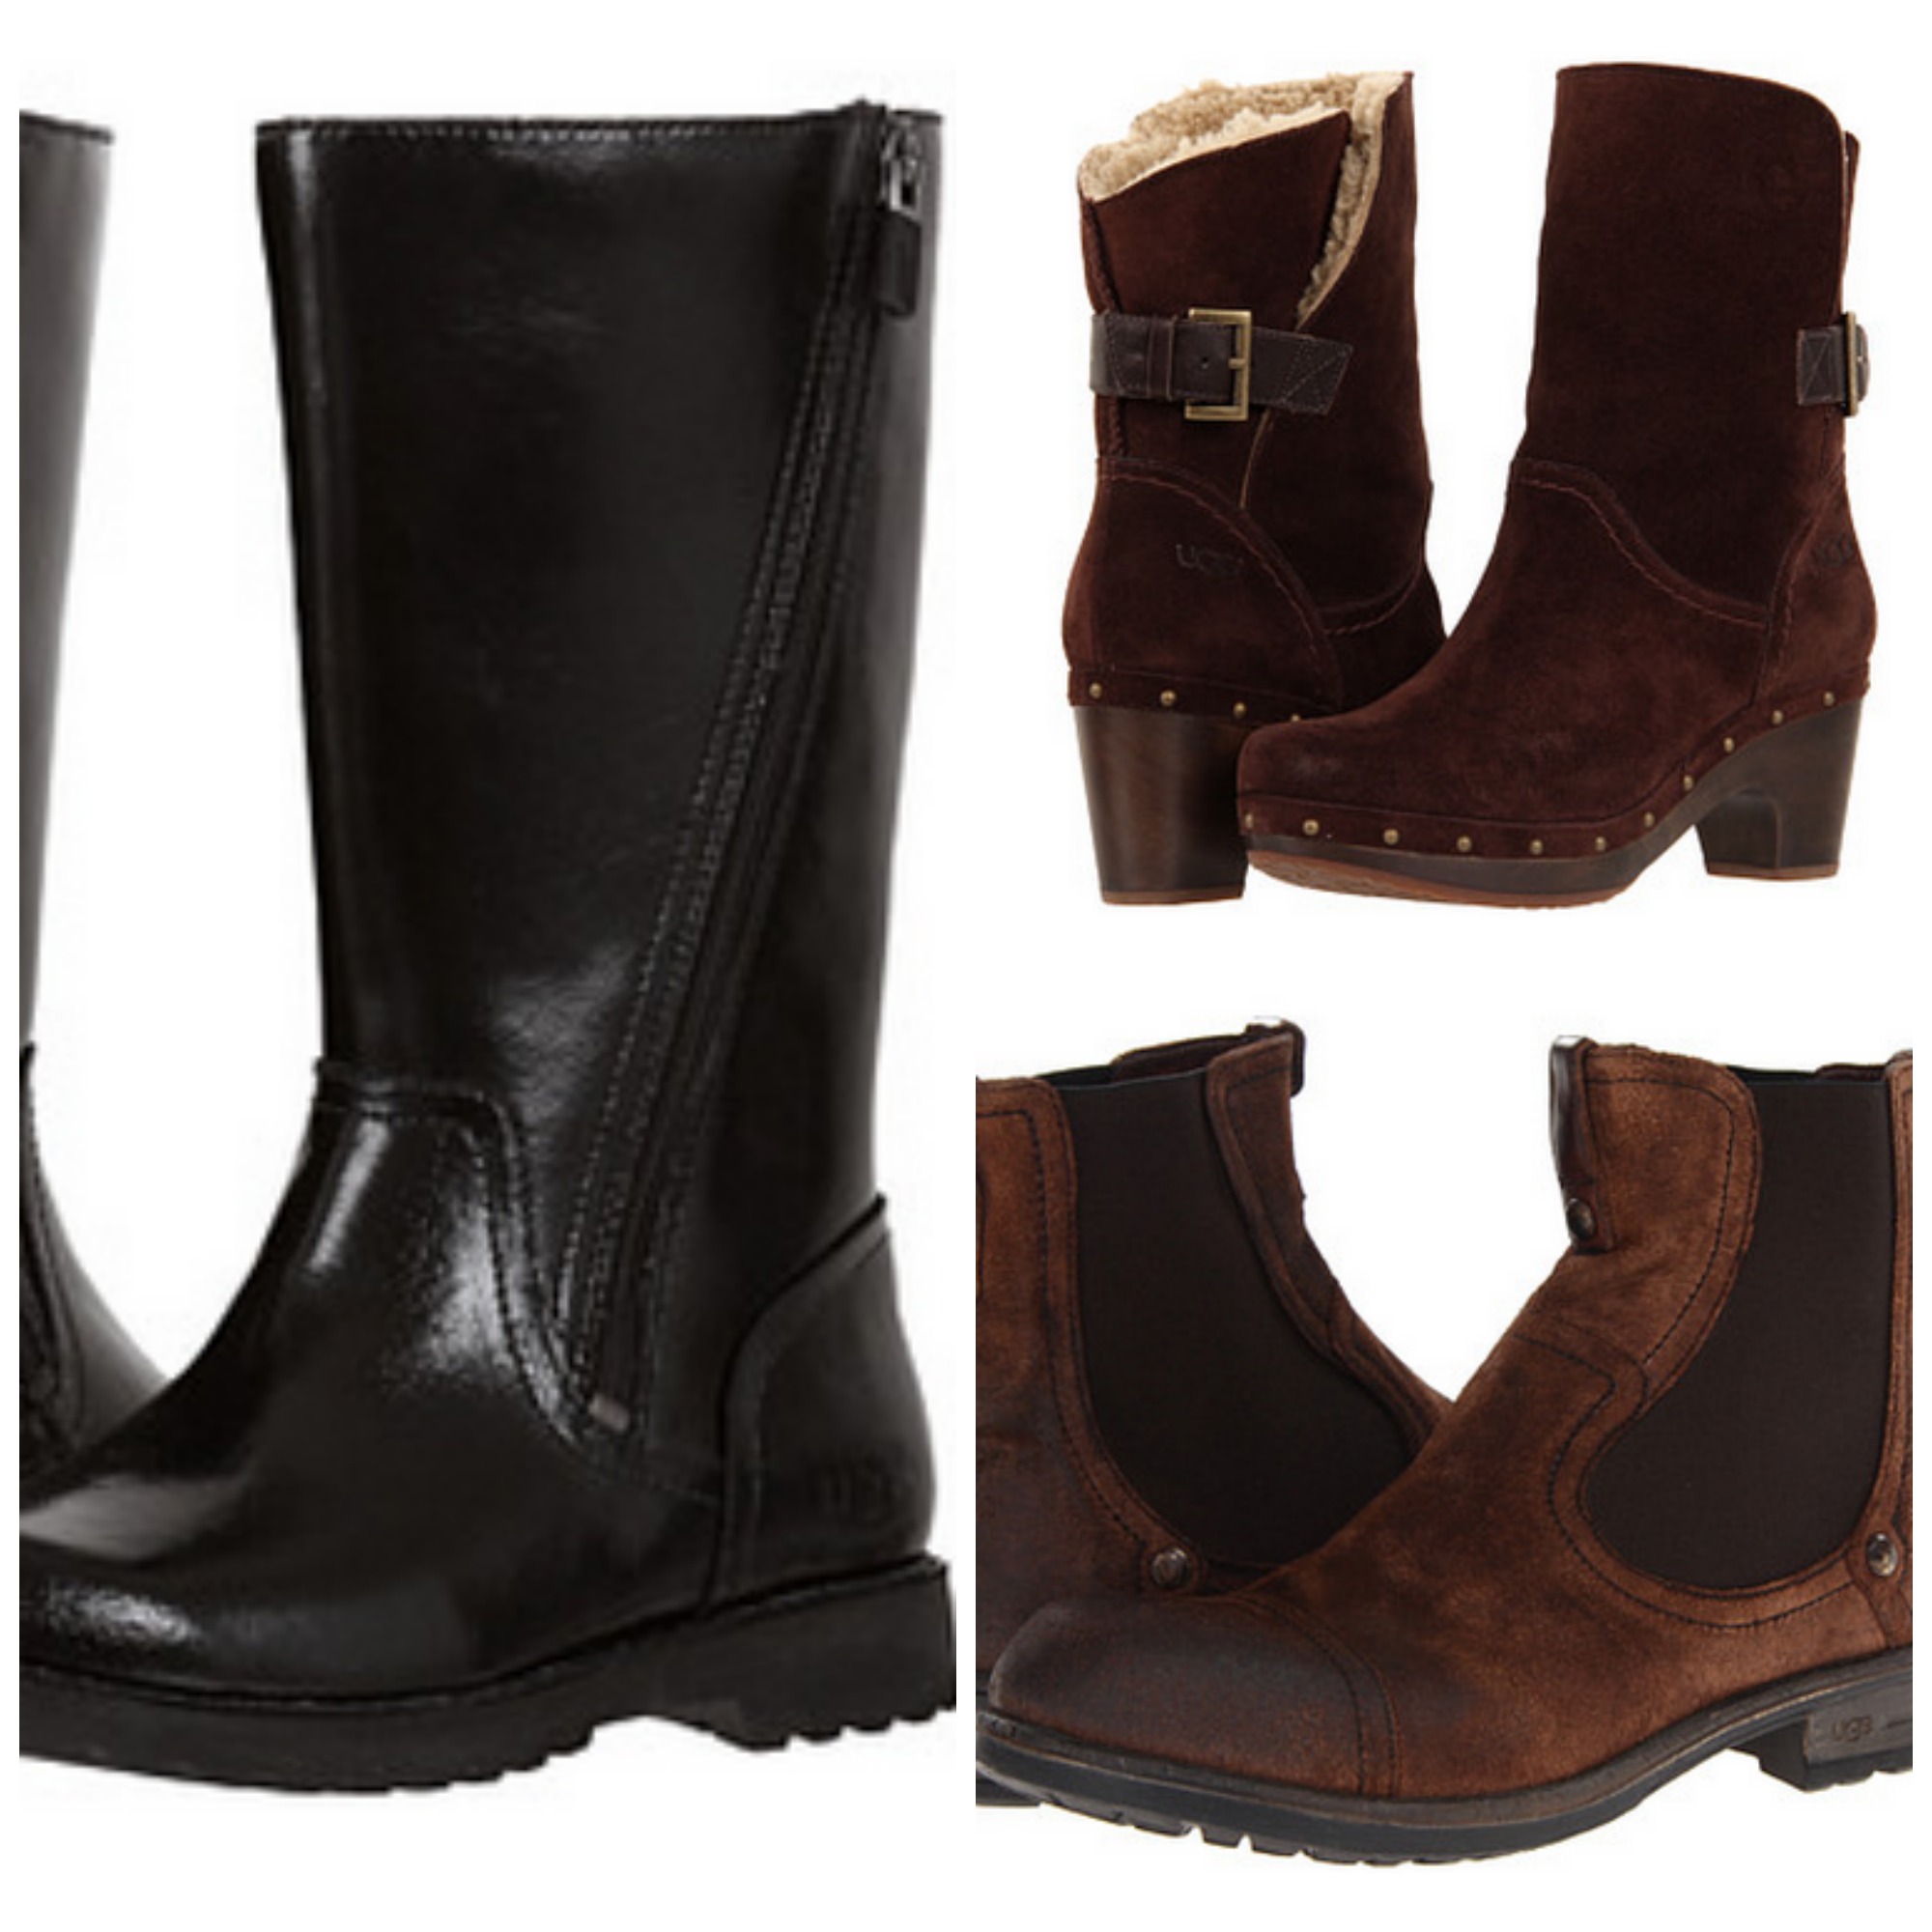 Uggs Boots Sale Up To 70% Off + Free 